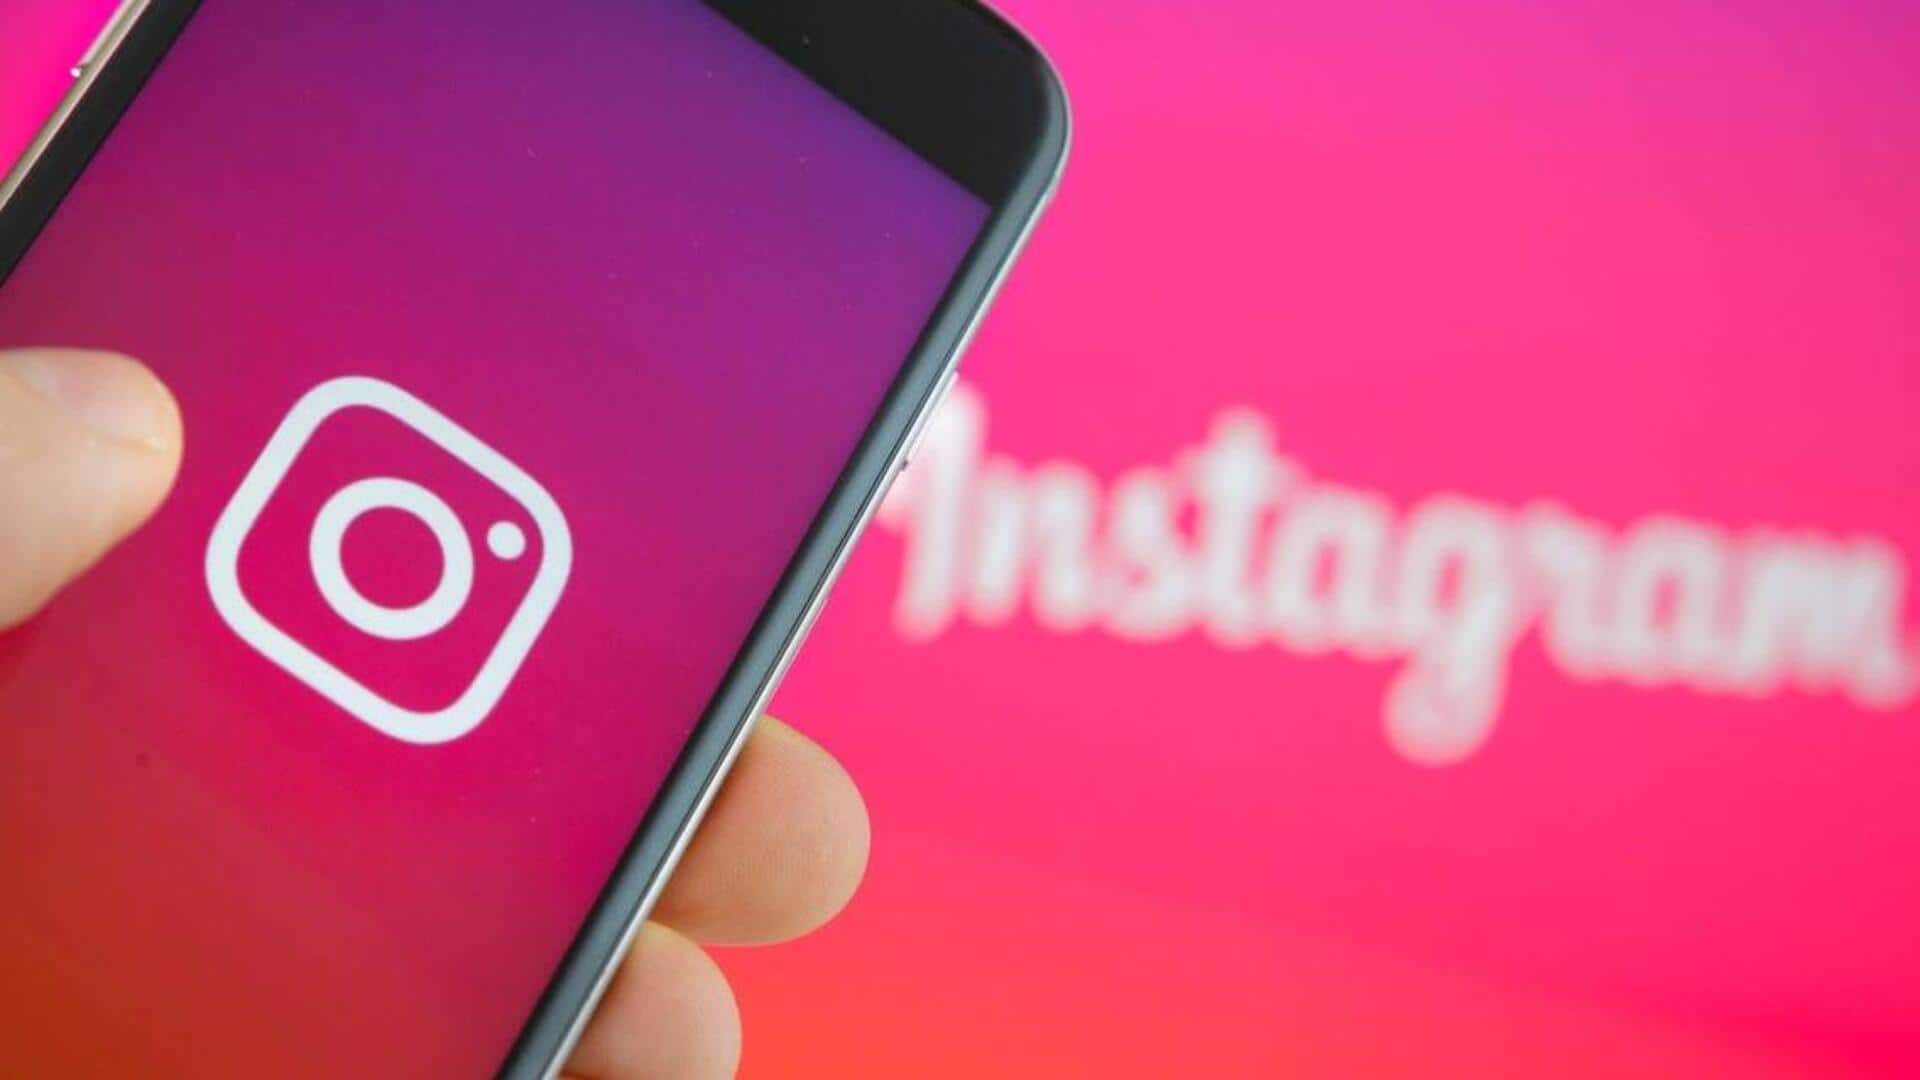 Instagram will soon show where your besties are hanging out